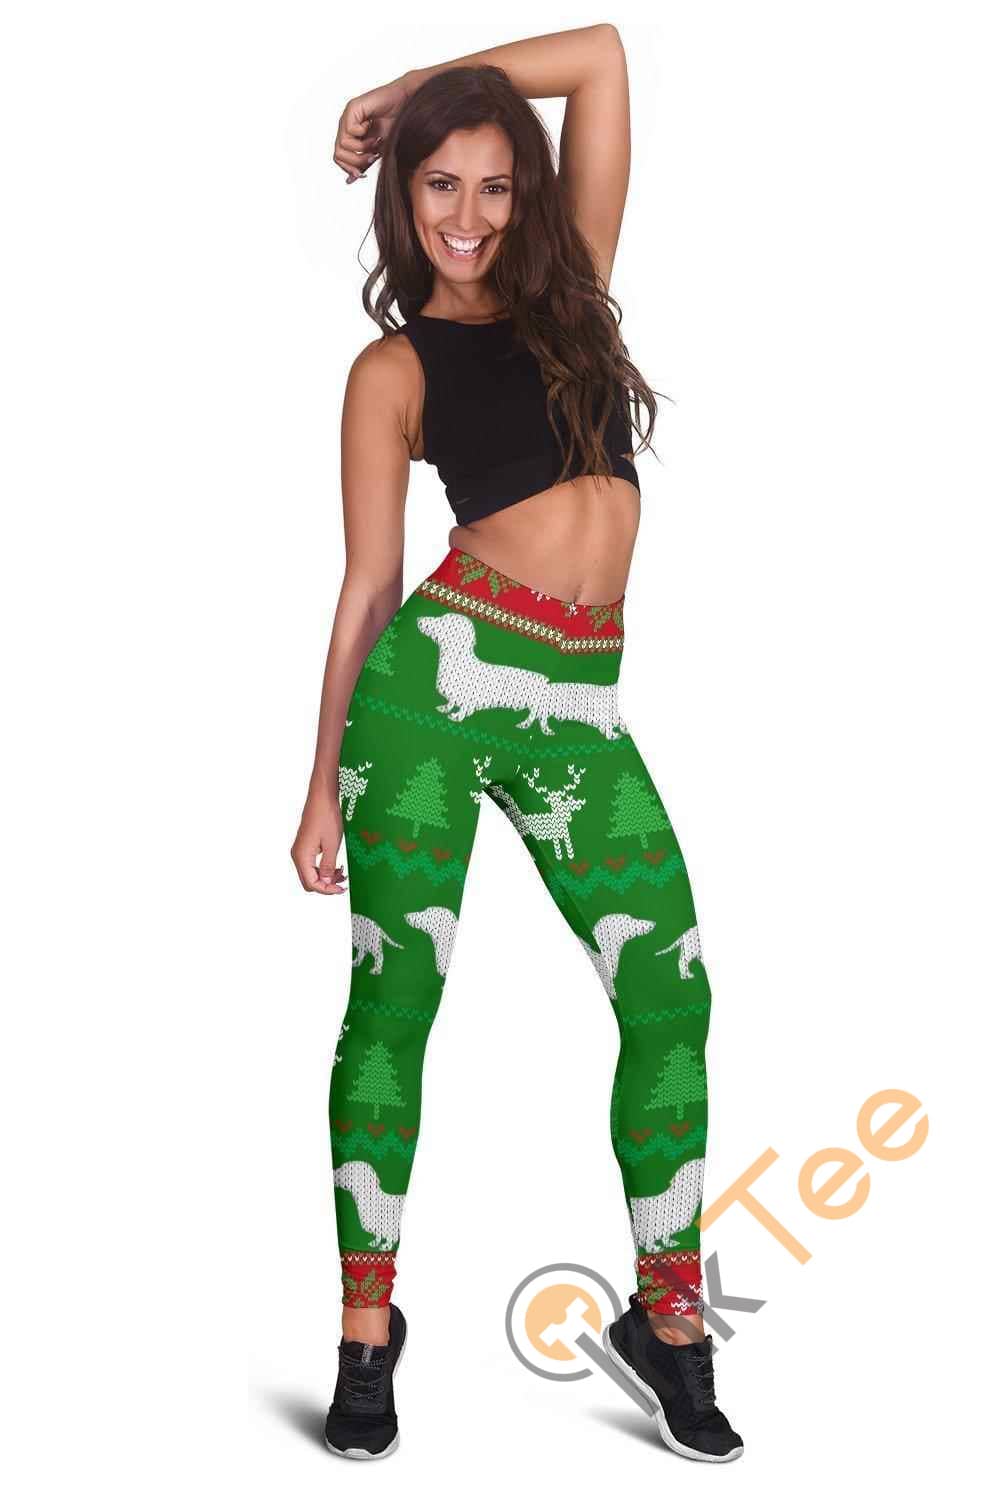 Inktee Store - Ugly Christmas Sweater 3D All Over Print For Yoga Fitness With Dachshunds Women'S Leggings Image